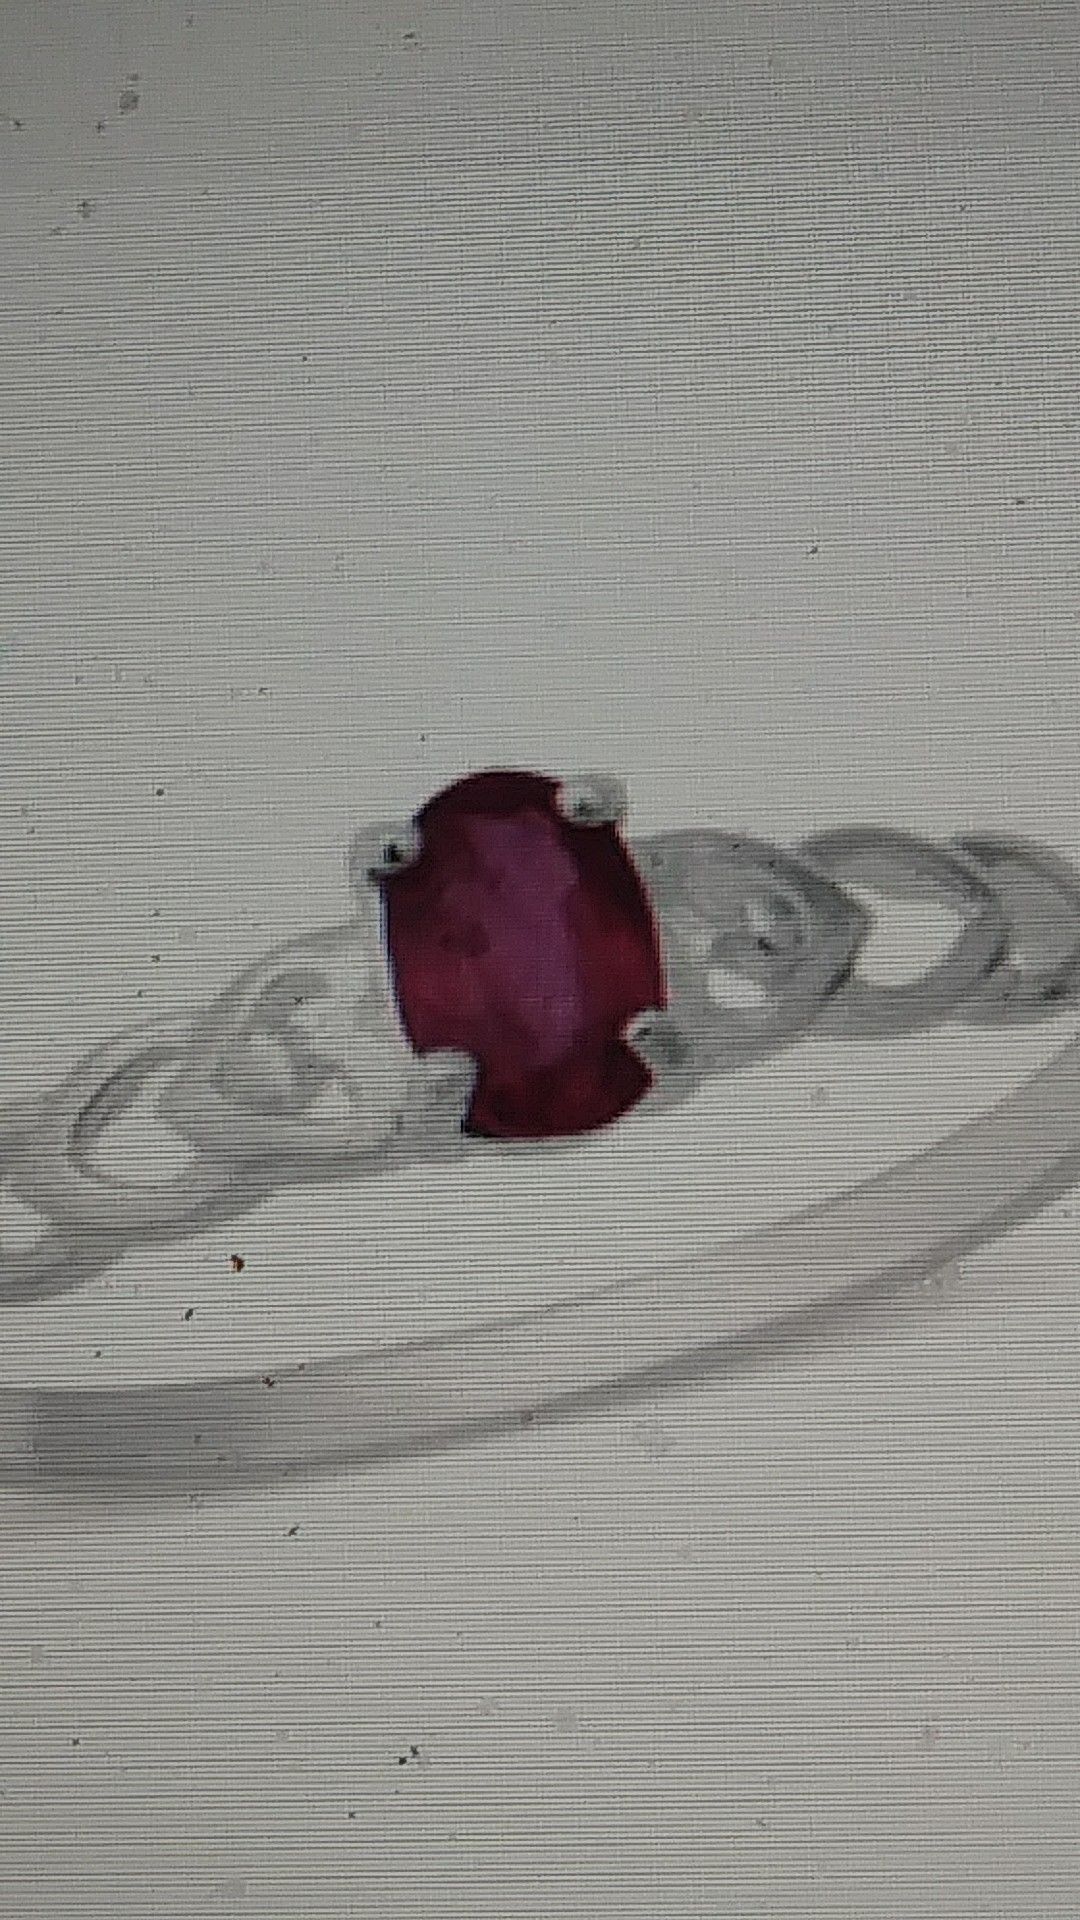 NWT-NIASSA RUBY SOLITAIRE RING IN STERLING.